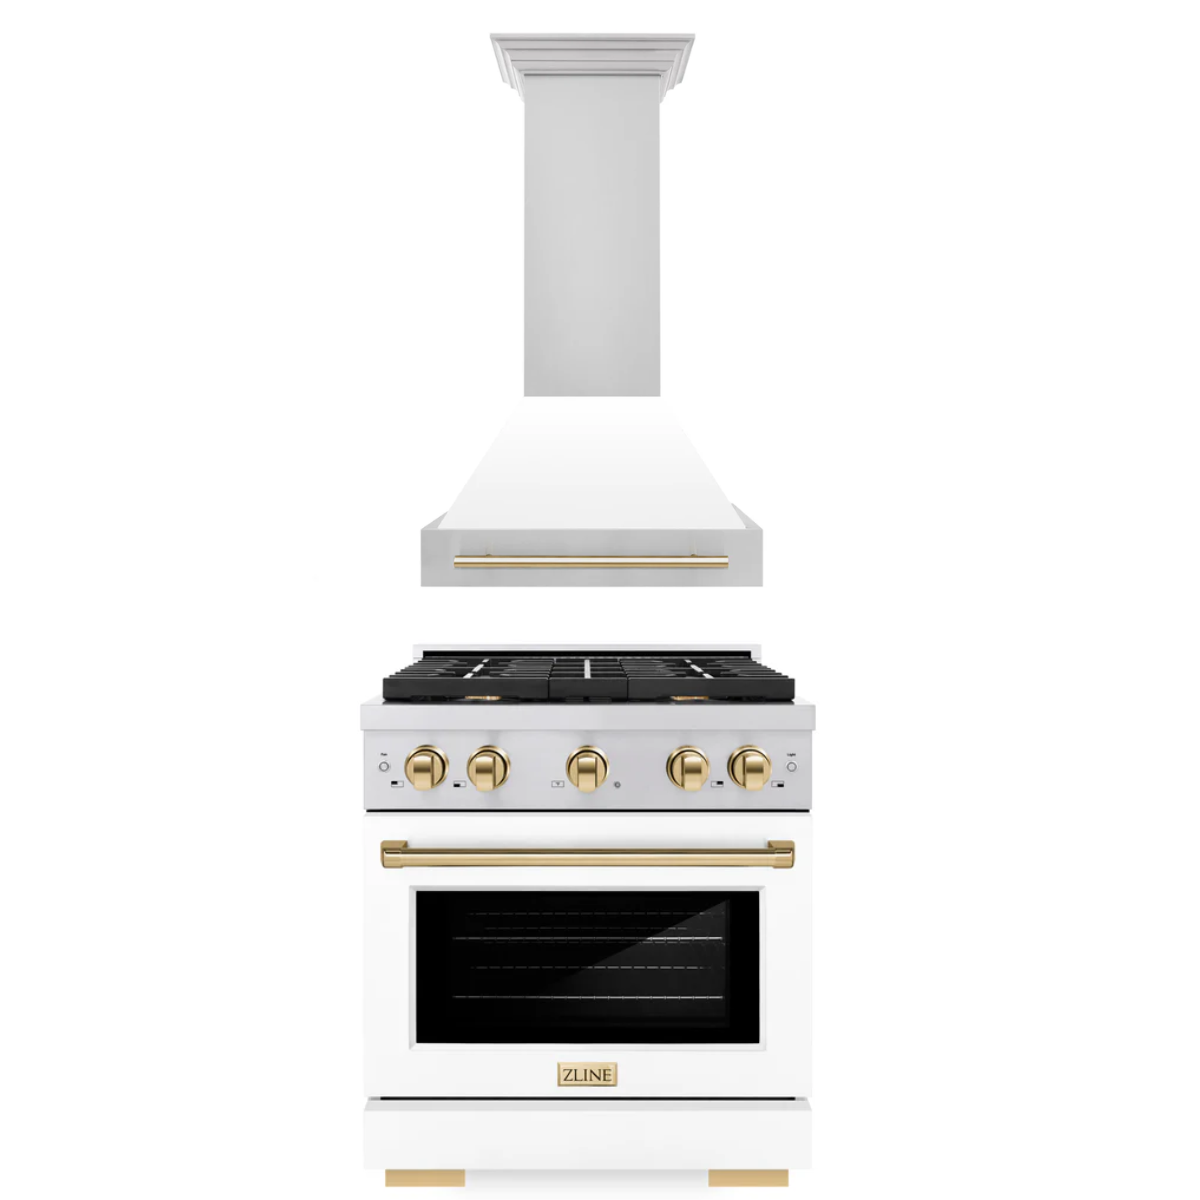 ZLINE Autograph Package - 30 In. Gas Range and Range Hood in Stainless Steel with White Matte Door and Gold Accents, 2AKP-RGWMRH30-G